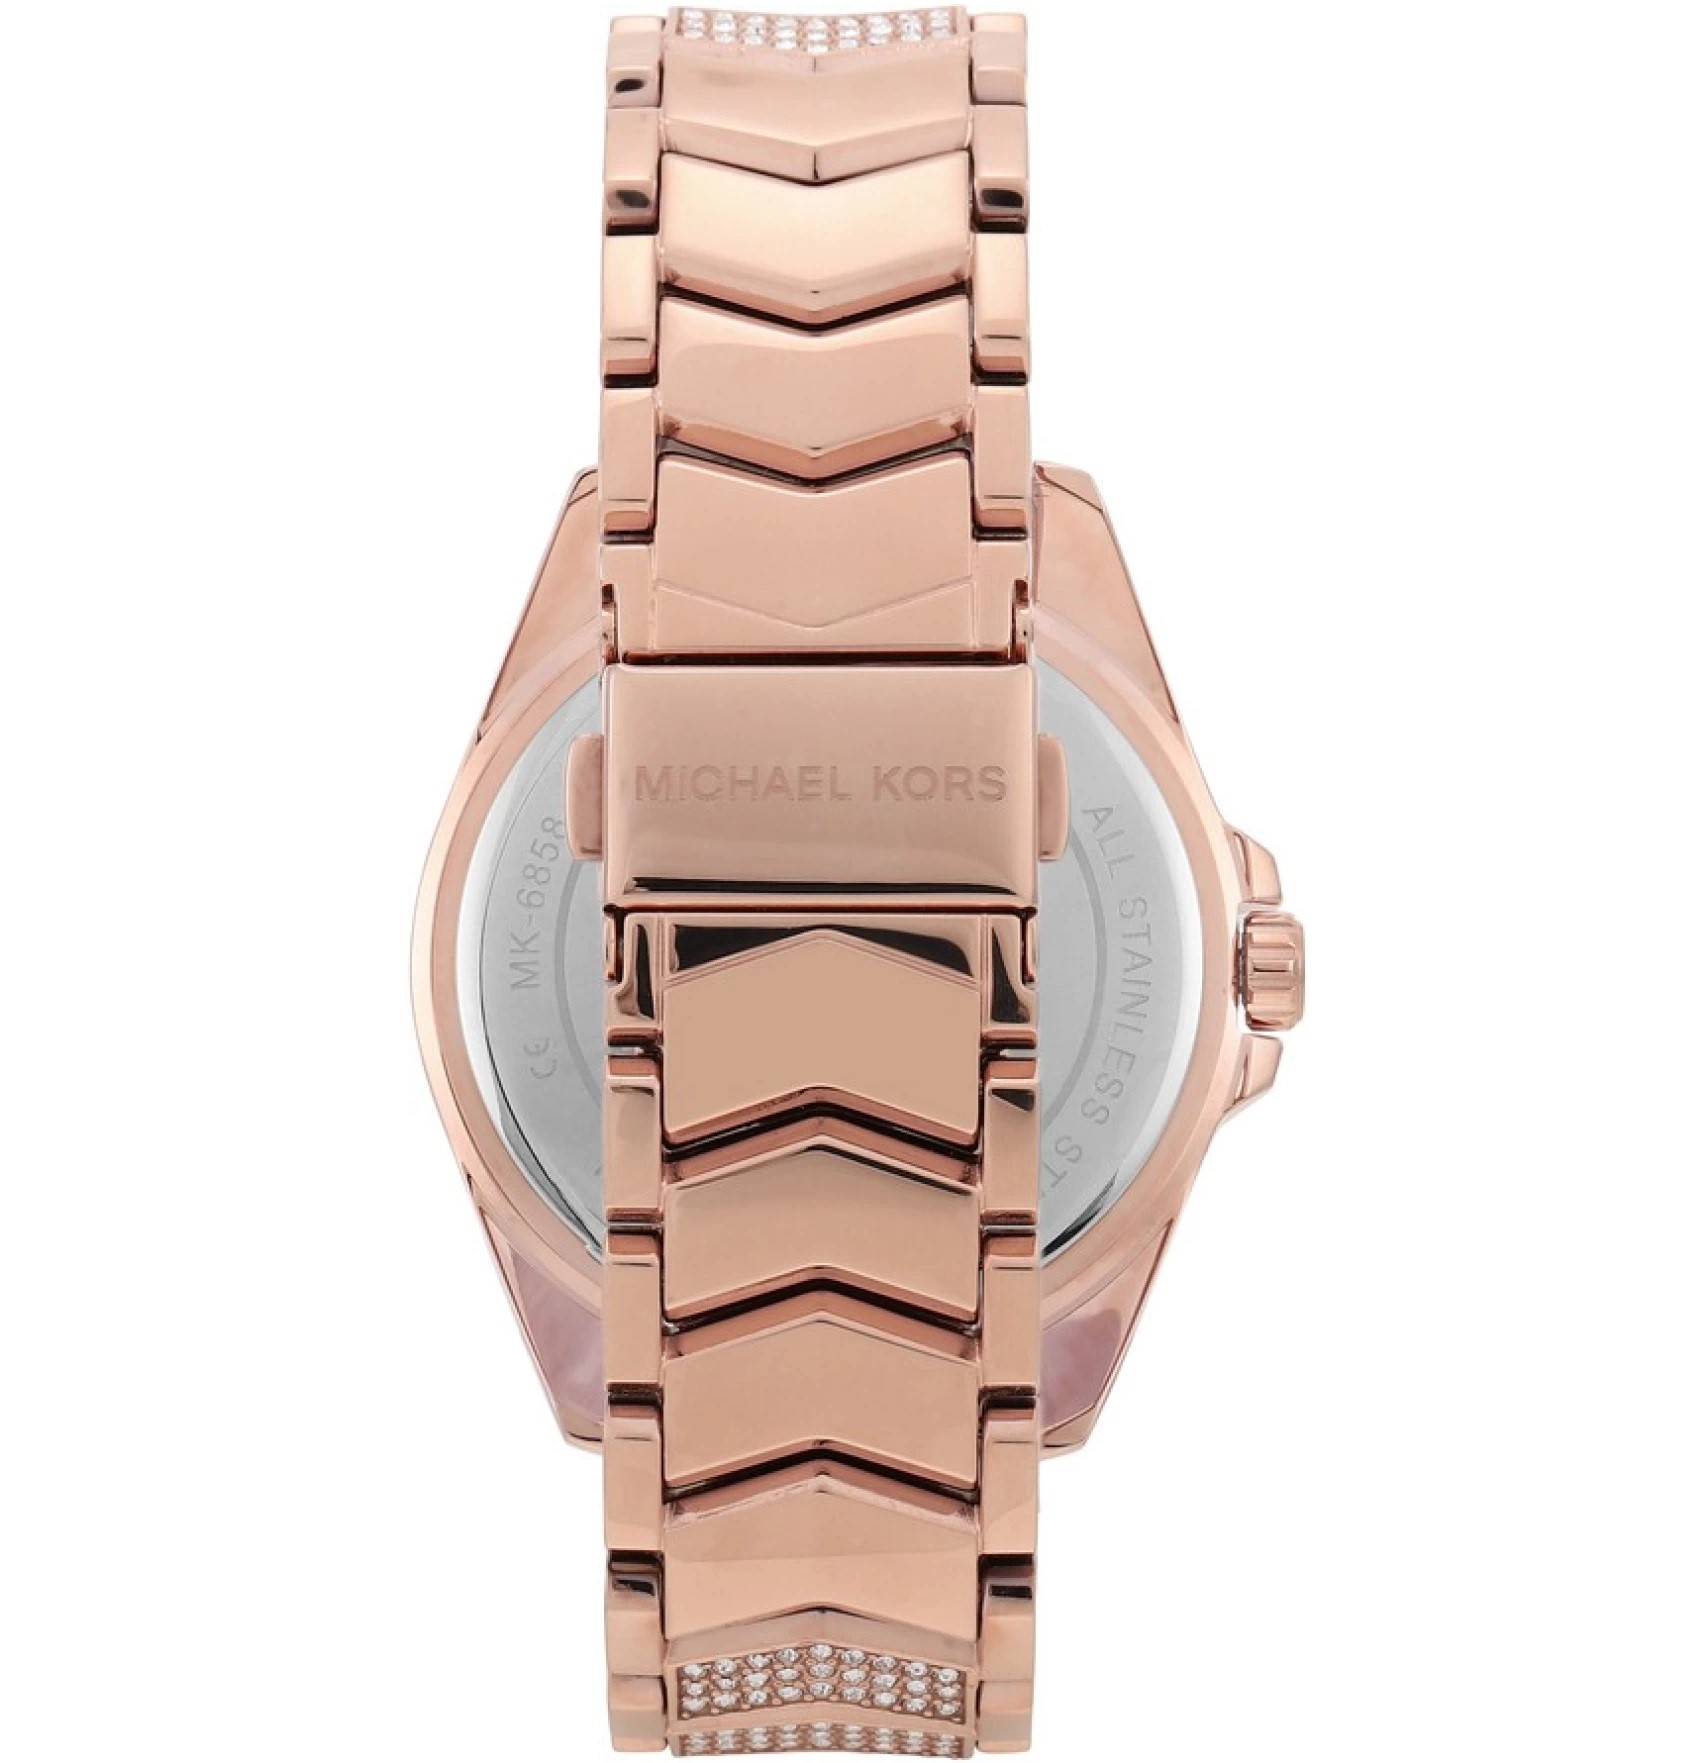 ĐỒNG HỒ NỮ MICHAEL KORS WHITNEY STAINLESS STEEL ANALOGUE WATCH MK6858 7